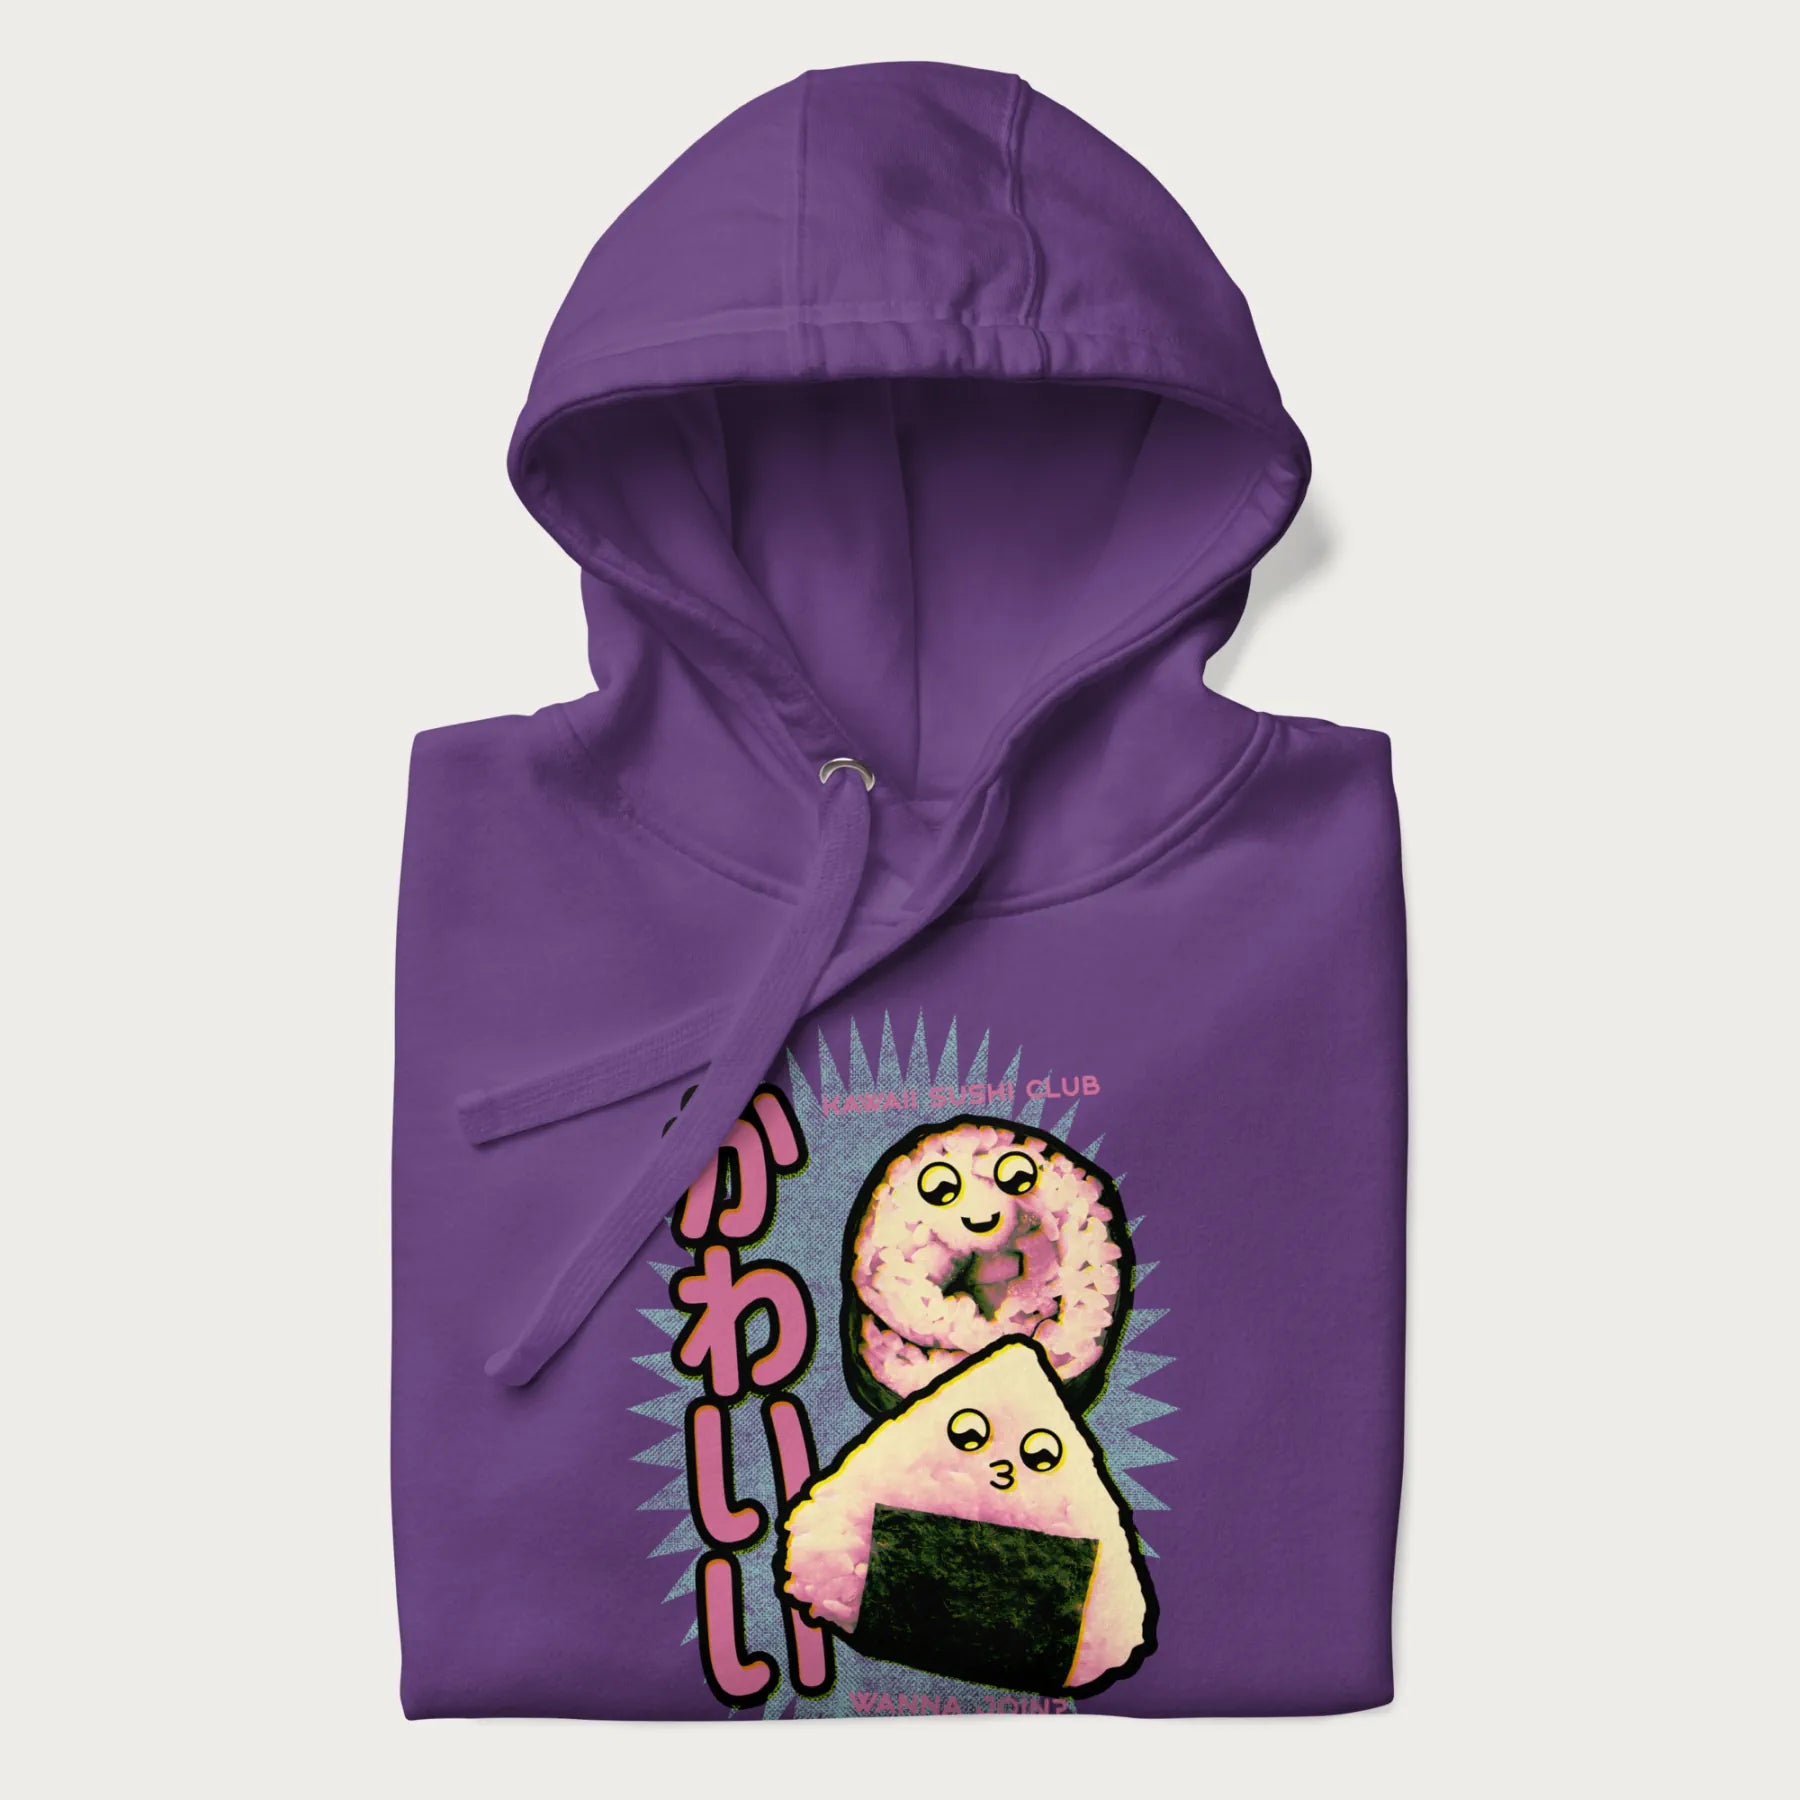 Folded purple hoodie featuring a cute sushi and onigiri graphic with the text "Kawaii Sushi Club", colorful neon accents and Japanese characters.